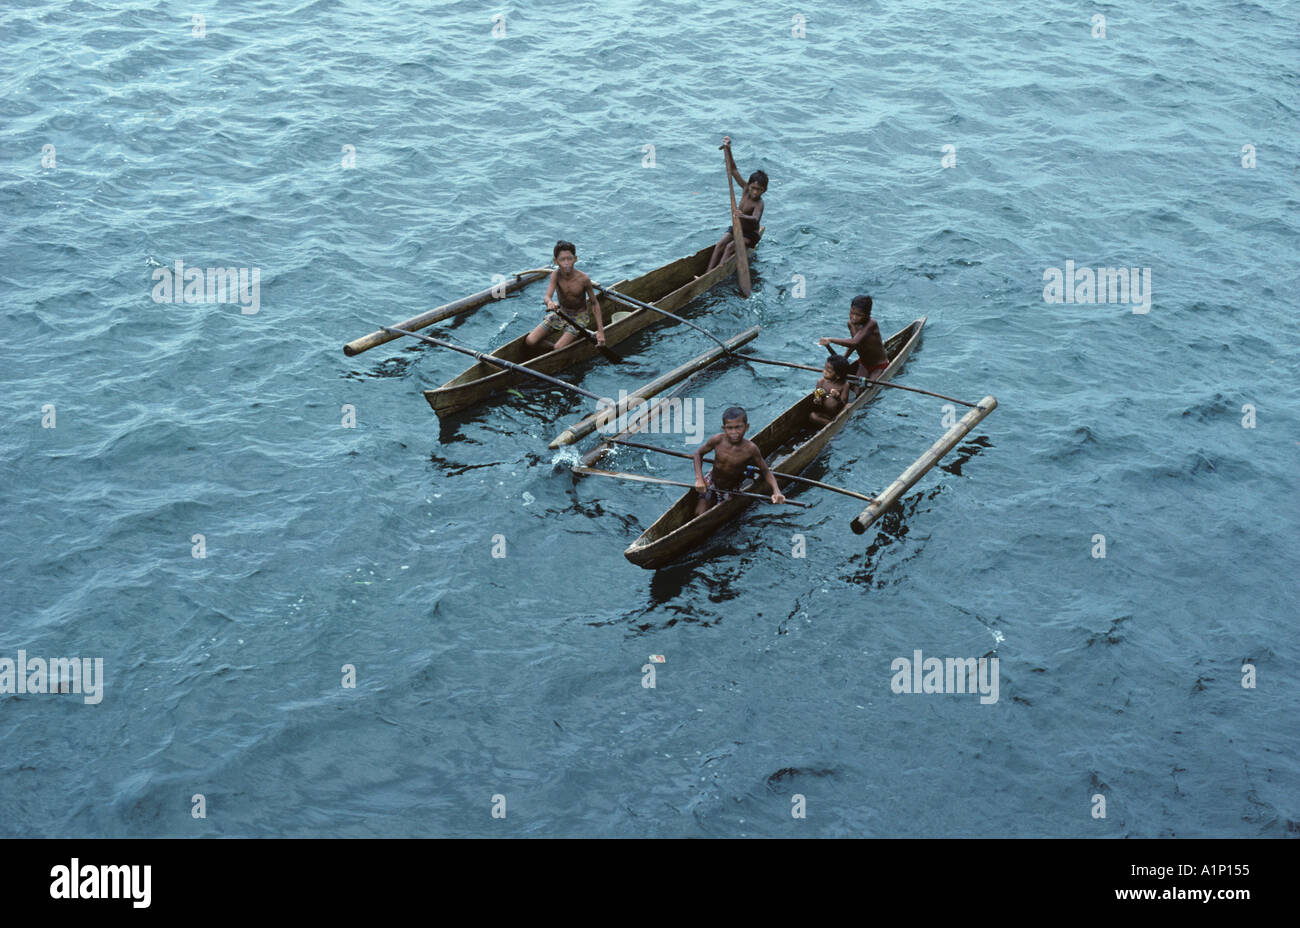 Badjao Badjau or Tau Laut sea gypsies children Basilan Island Mindanao Philippines In outrigger canoe Dive for coins in water Stock Photo